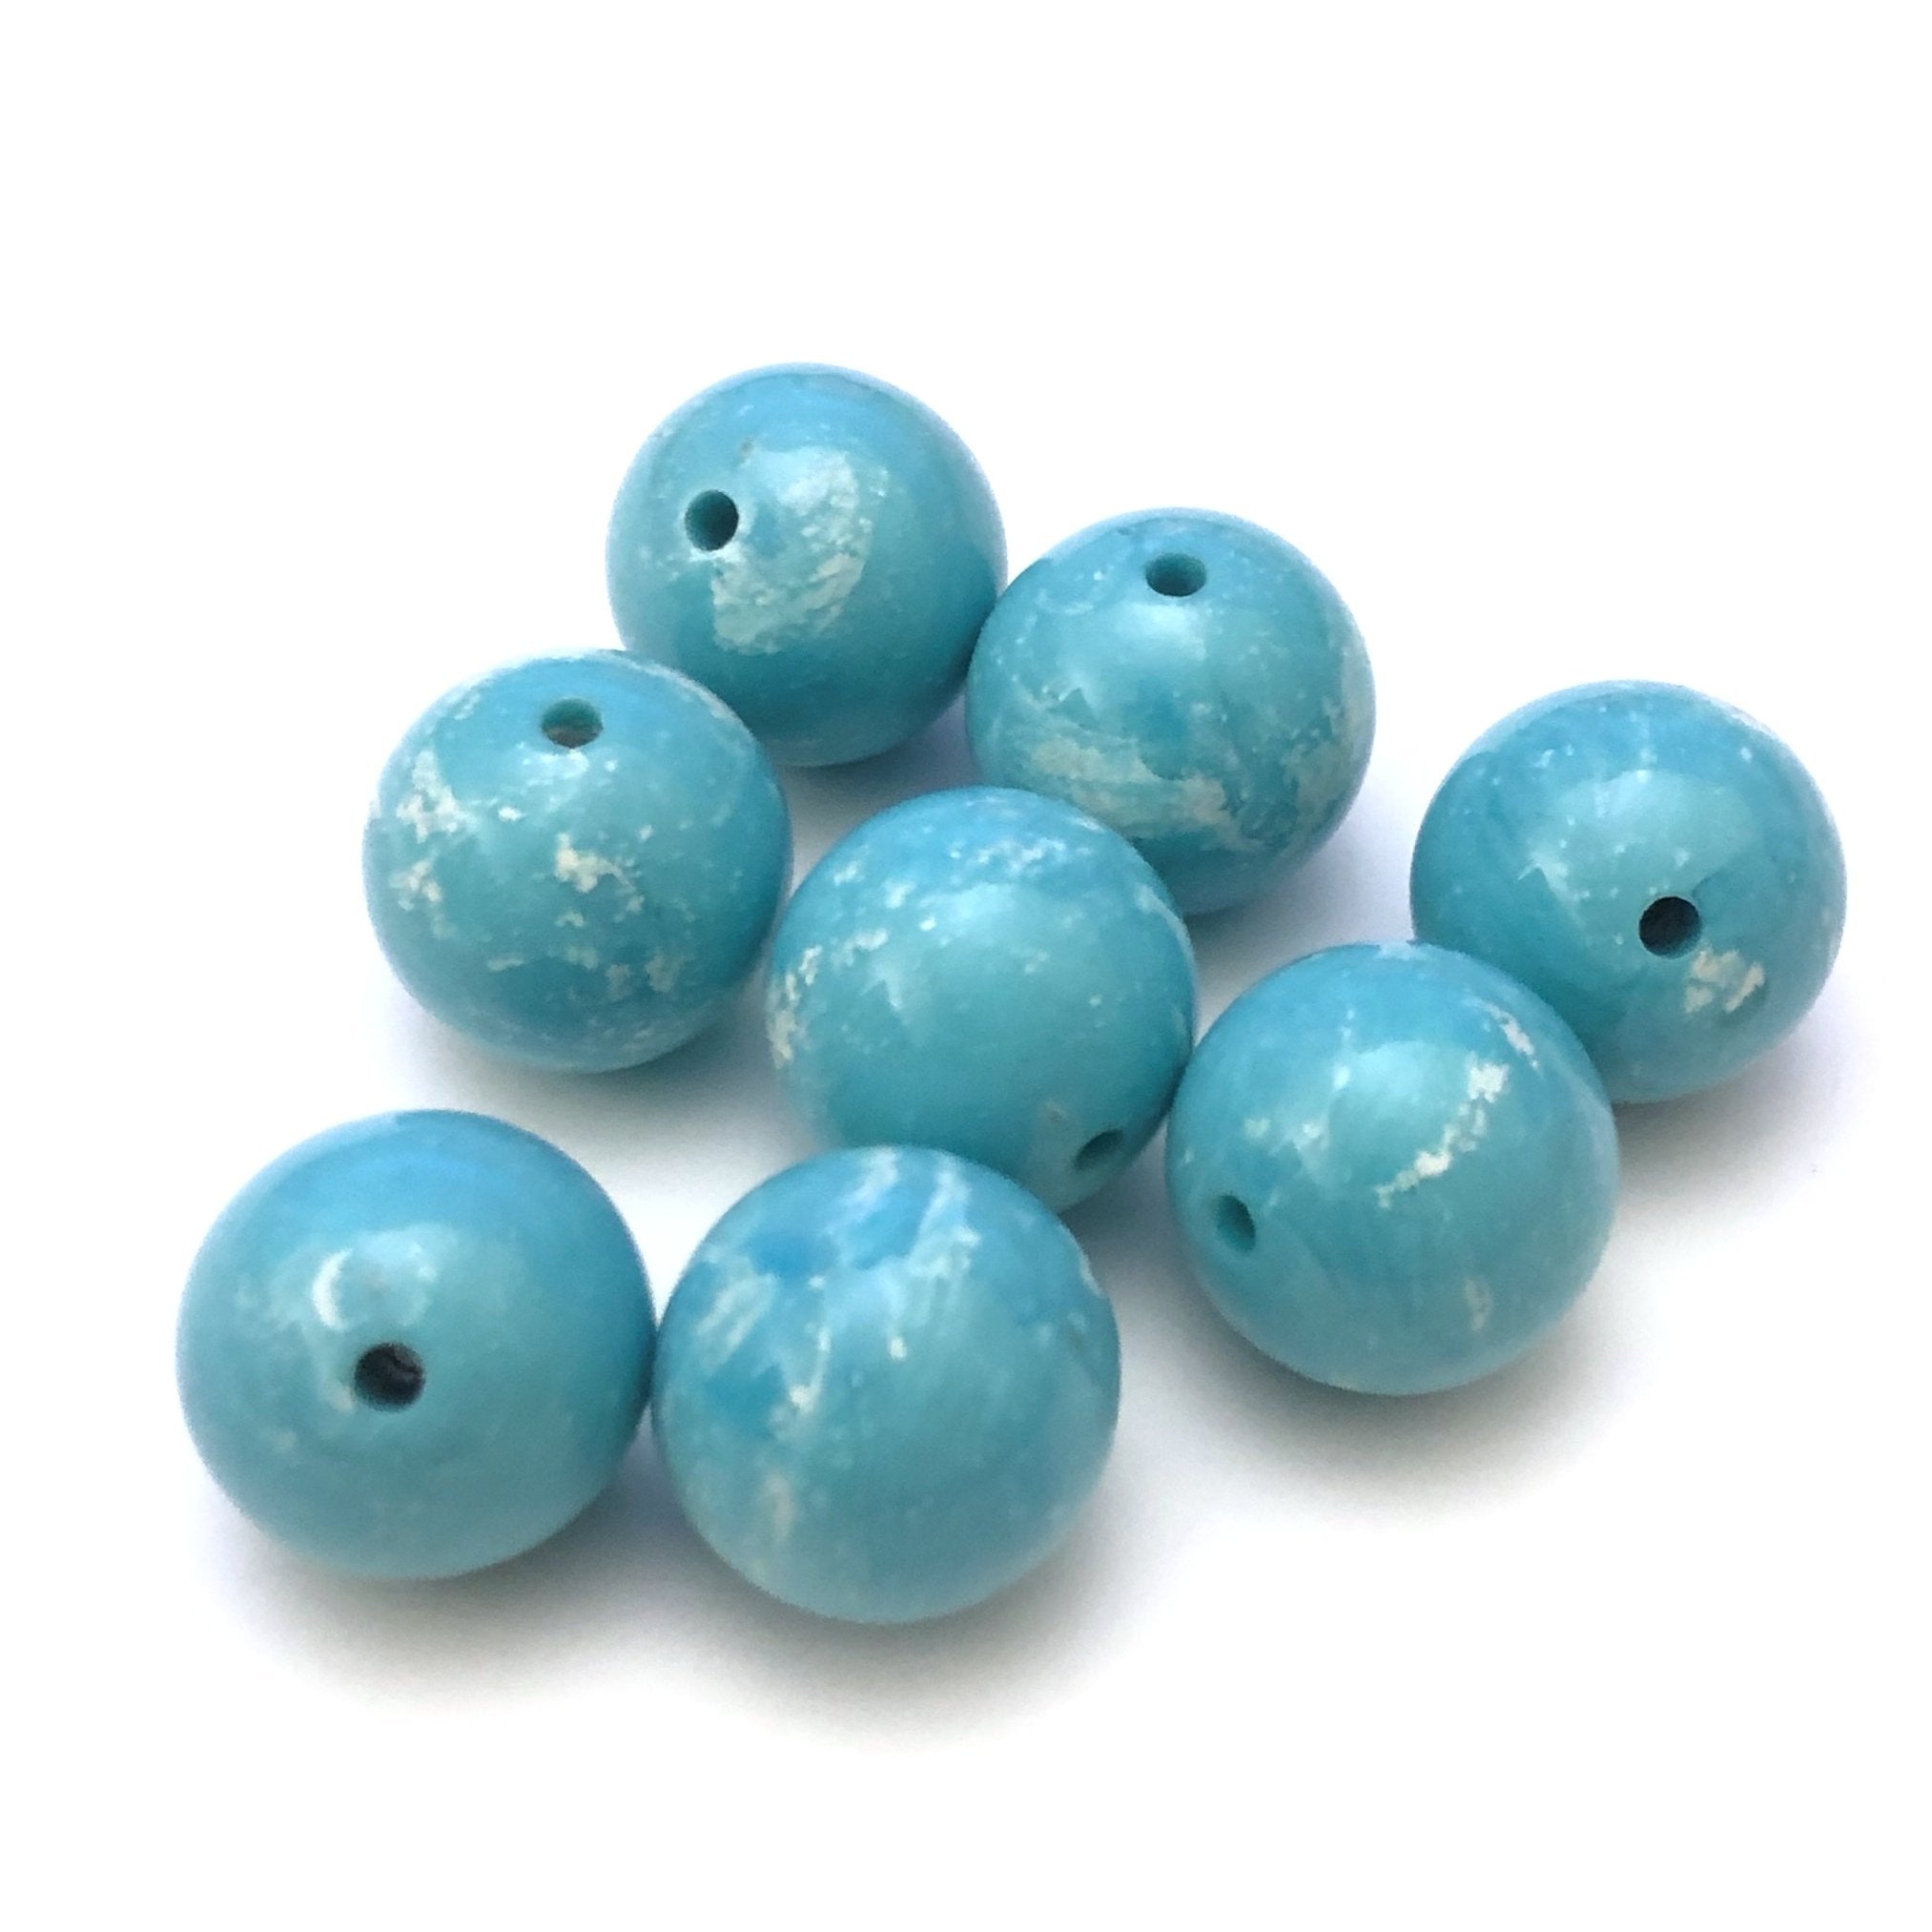 8MM Turquoise "Granite" Beads (288 pieces)